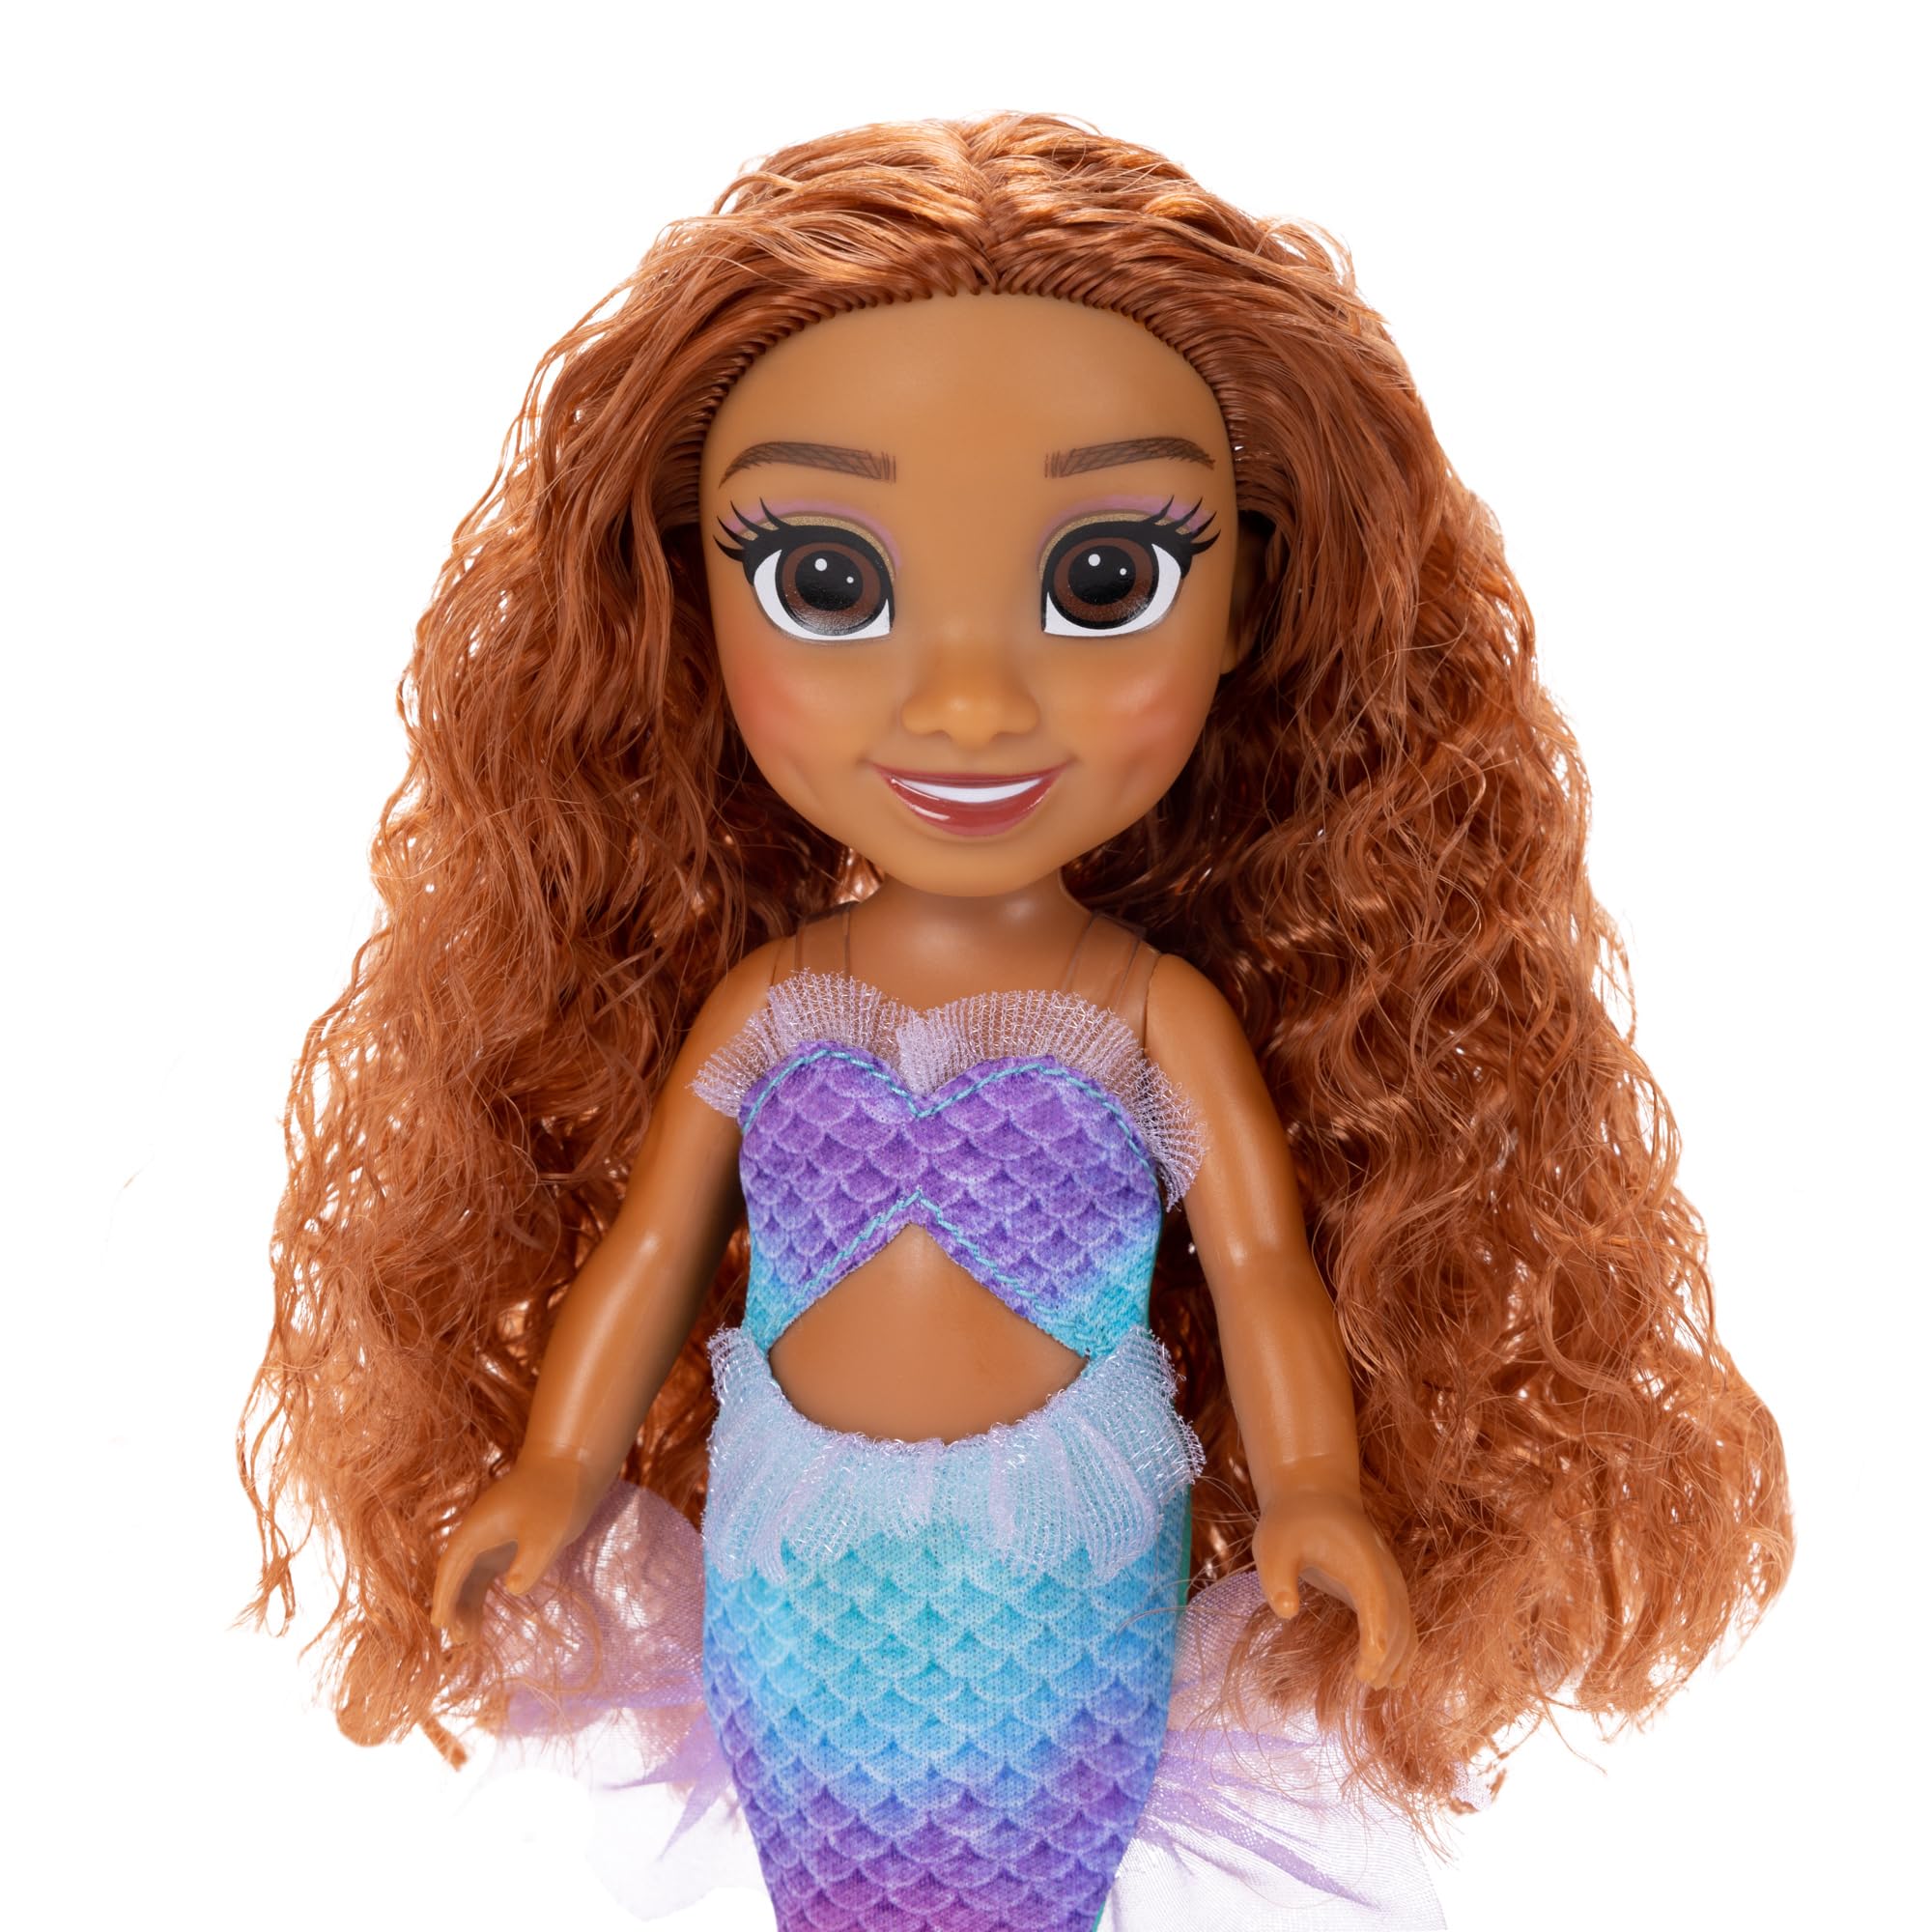 Disney The Little Mermaid Ariel and Sisters Petite Doll Set, Each Dolls Come with a Seashell Brush